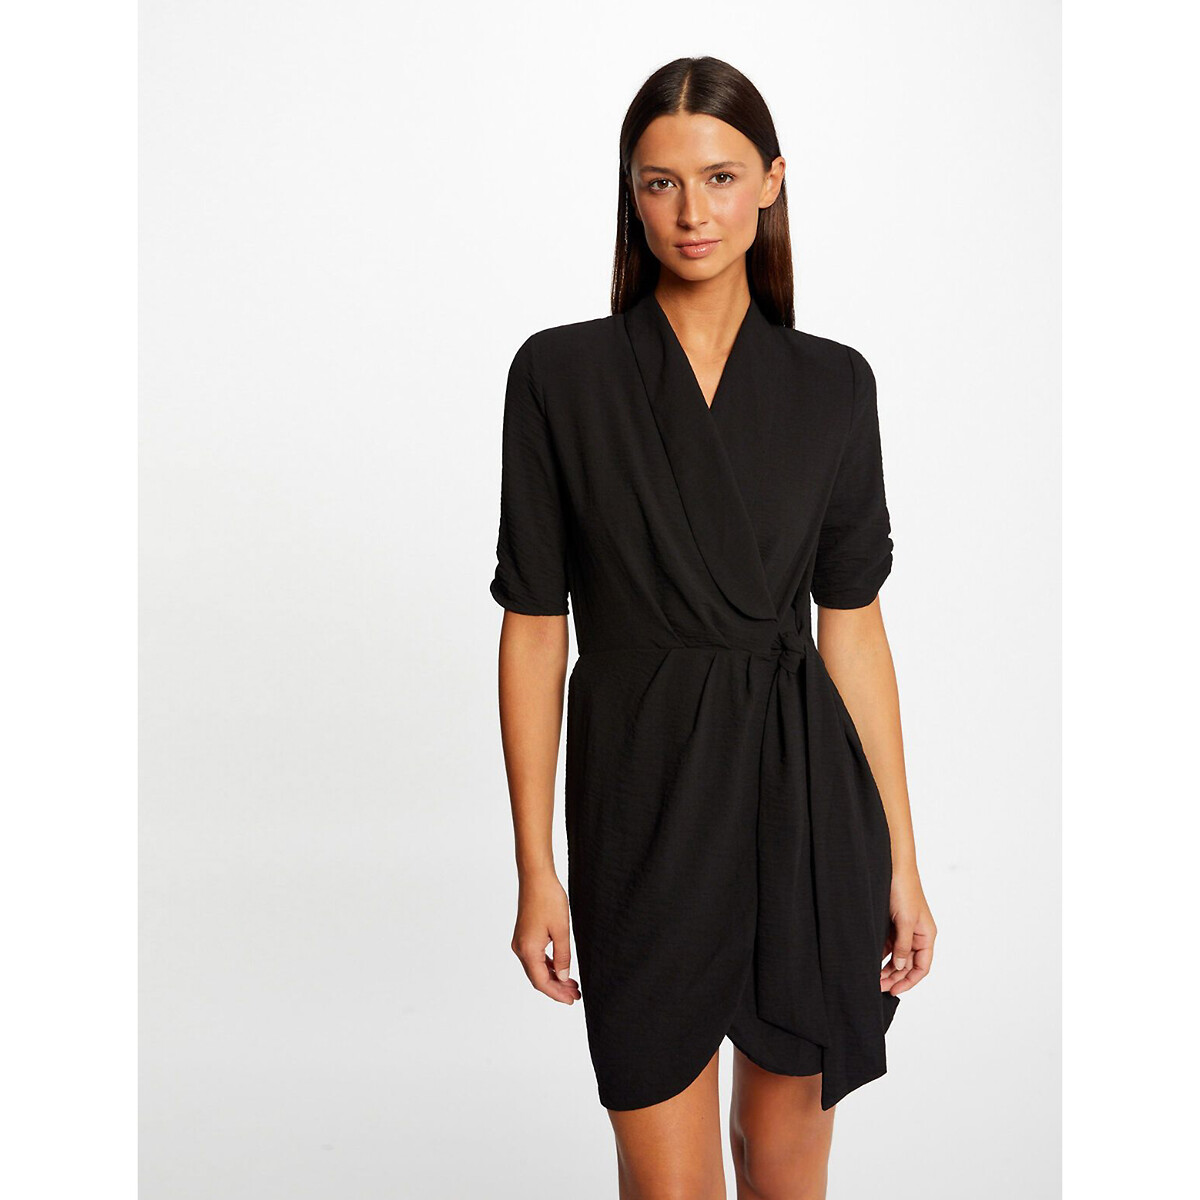 Wrapover Dress with 3/4 Length Ruched Sleeves